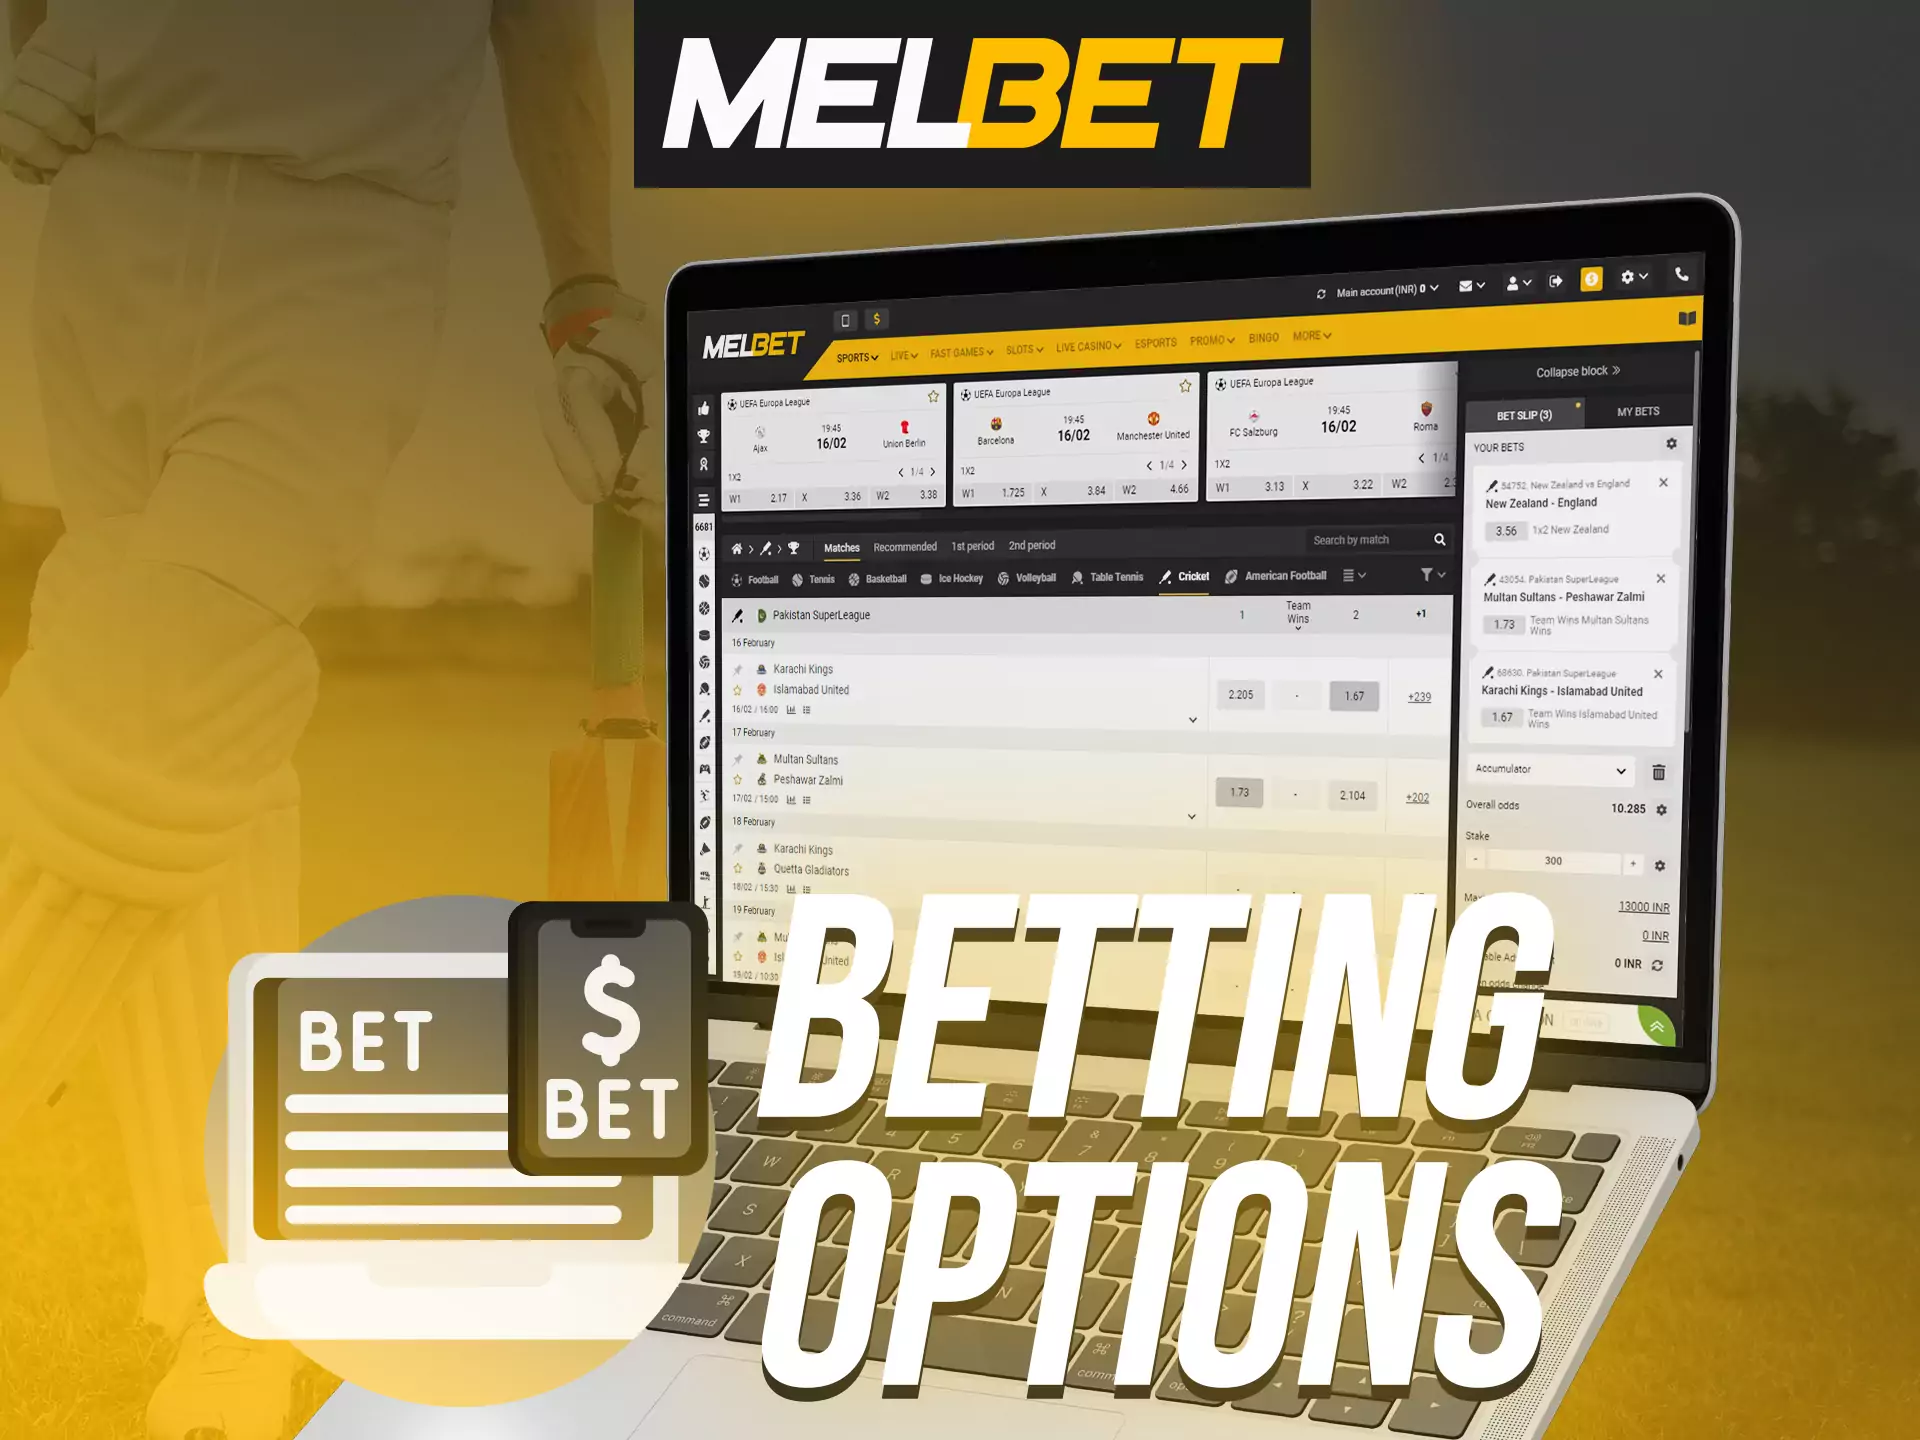 Bet how you want at Melbet.